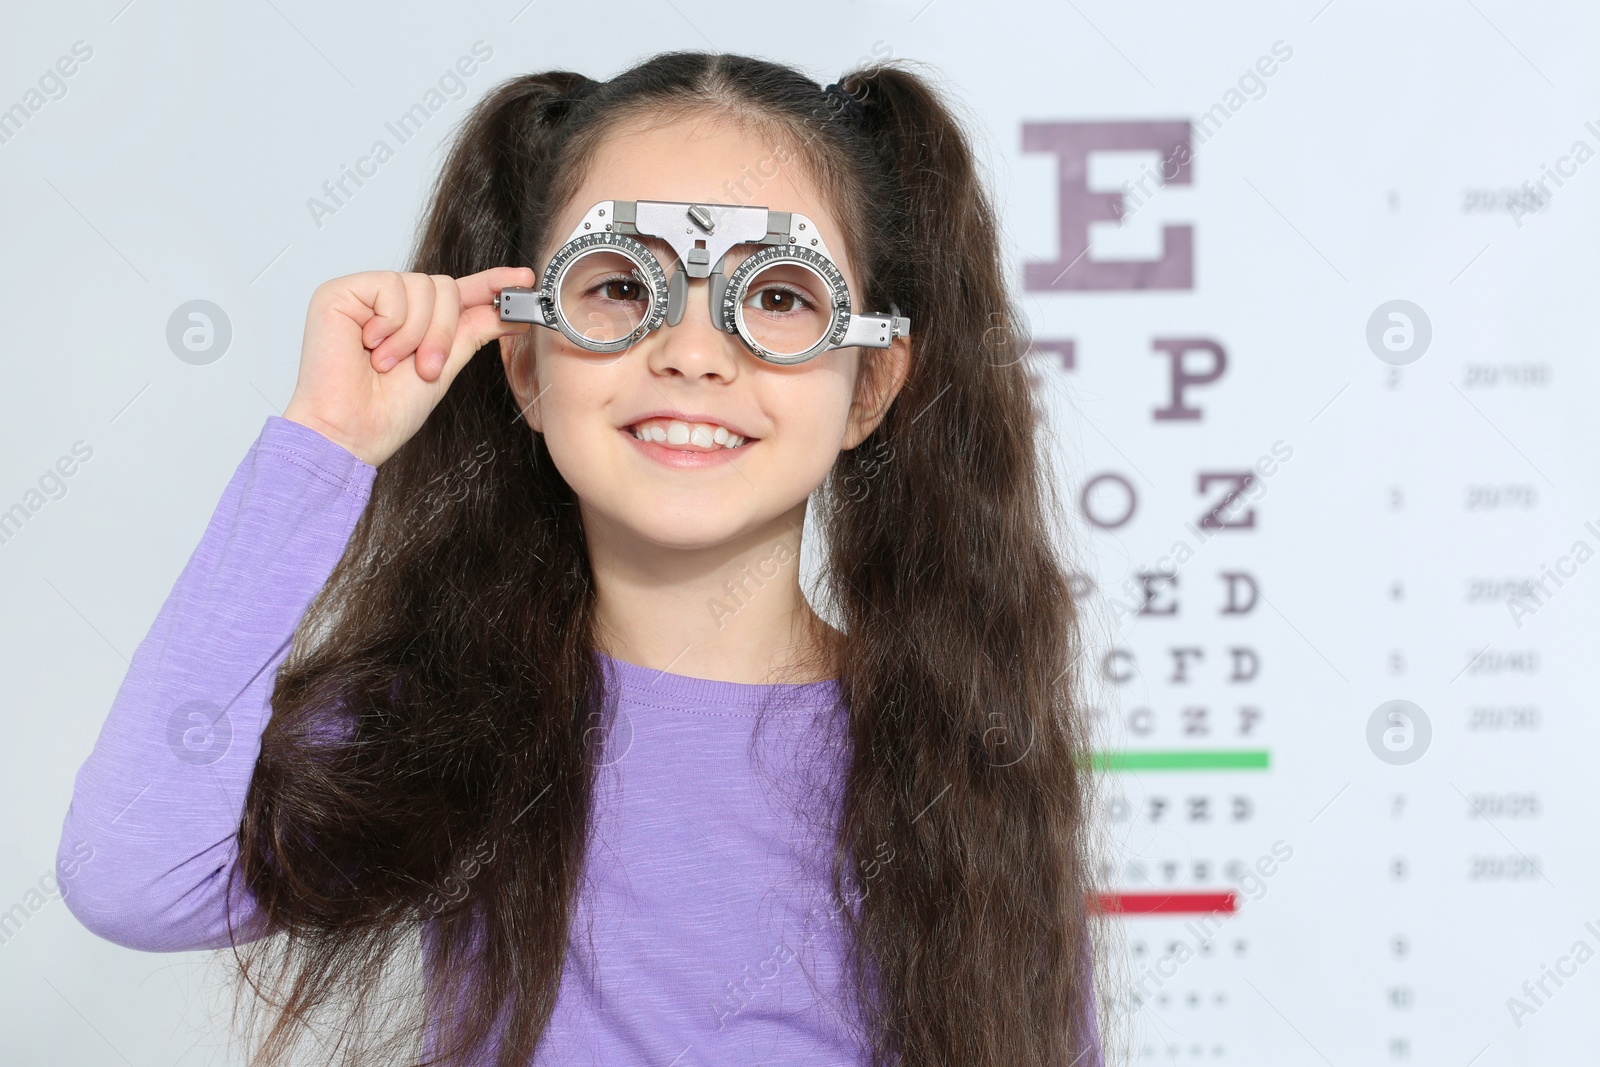 Photo of Little girl with trial frame near eye chart in hospital, space for text. Visiting children's doctor